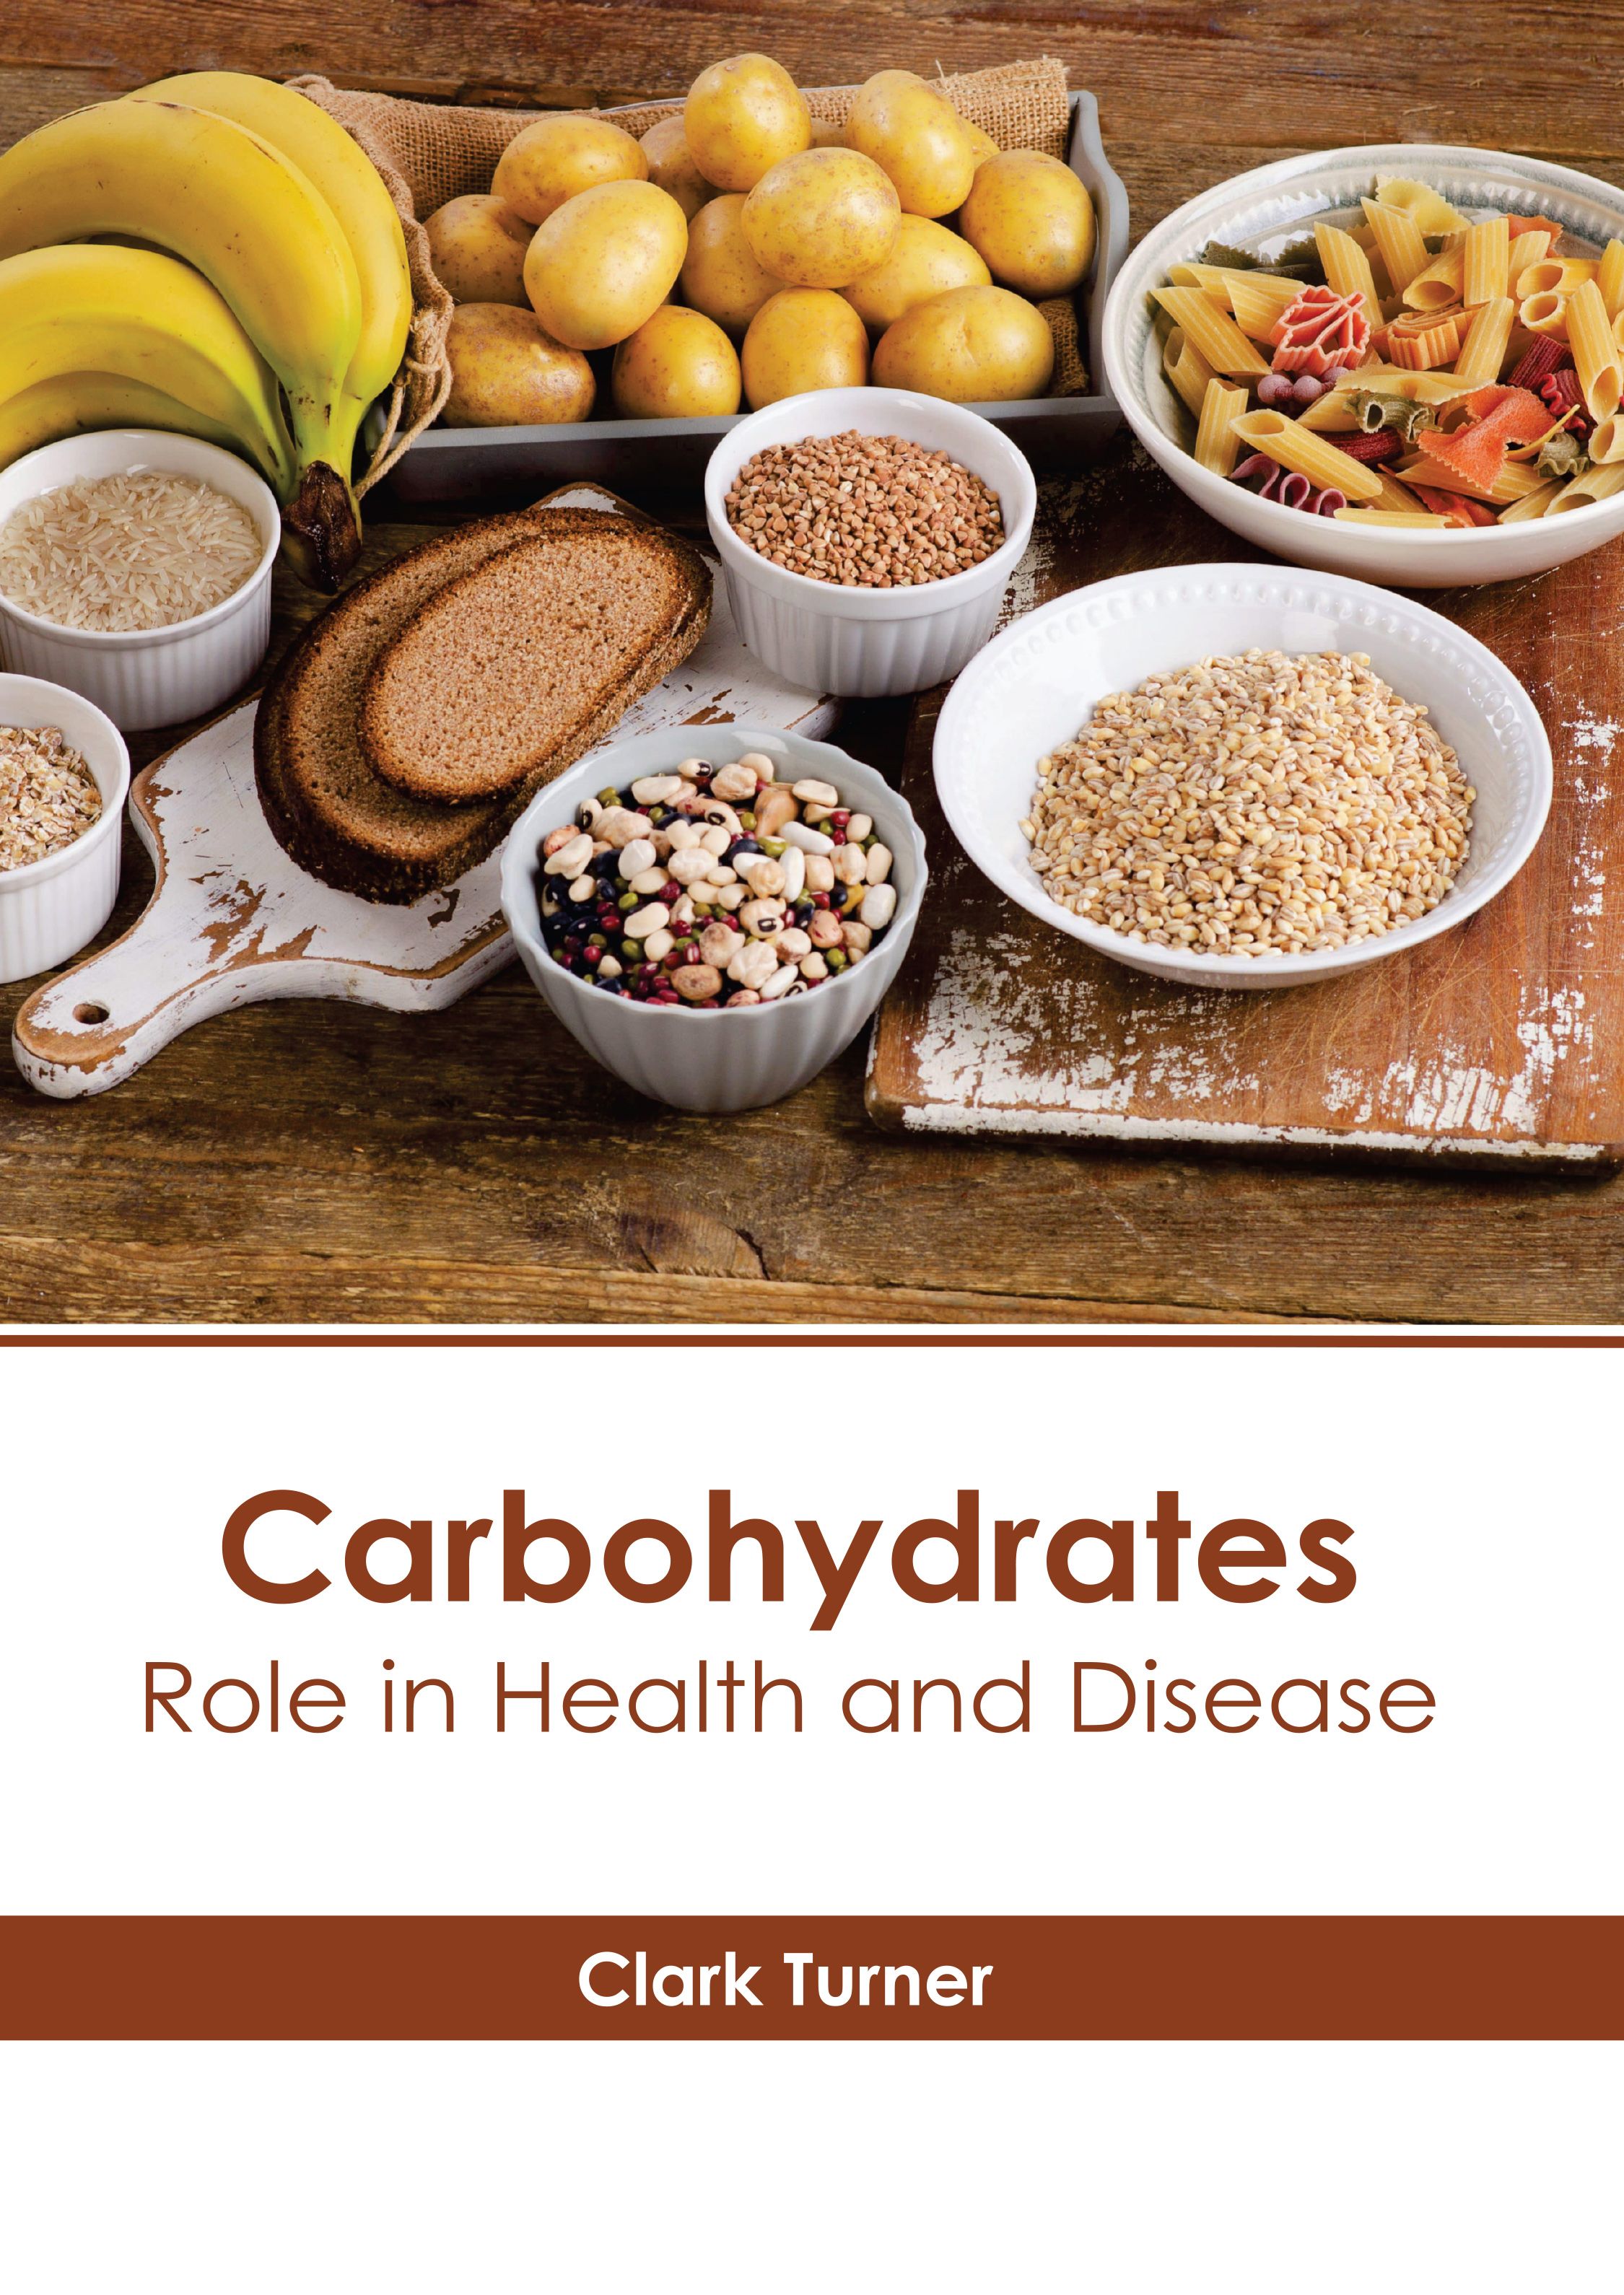 CARBOHYDRATES: ROLE IN HEALTH AND DISEASE